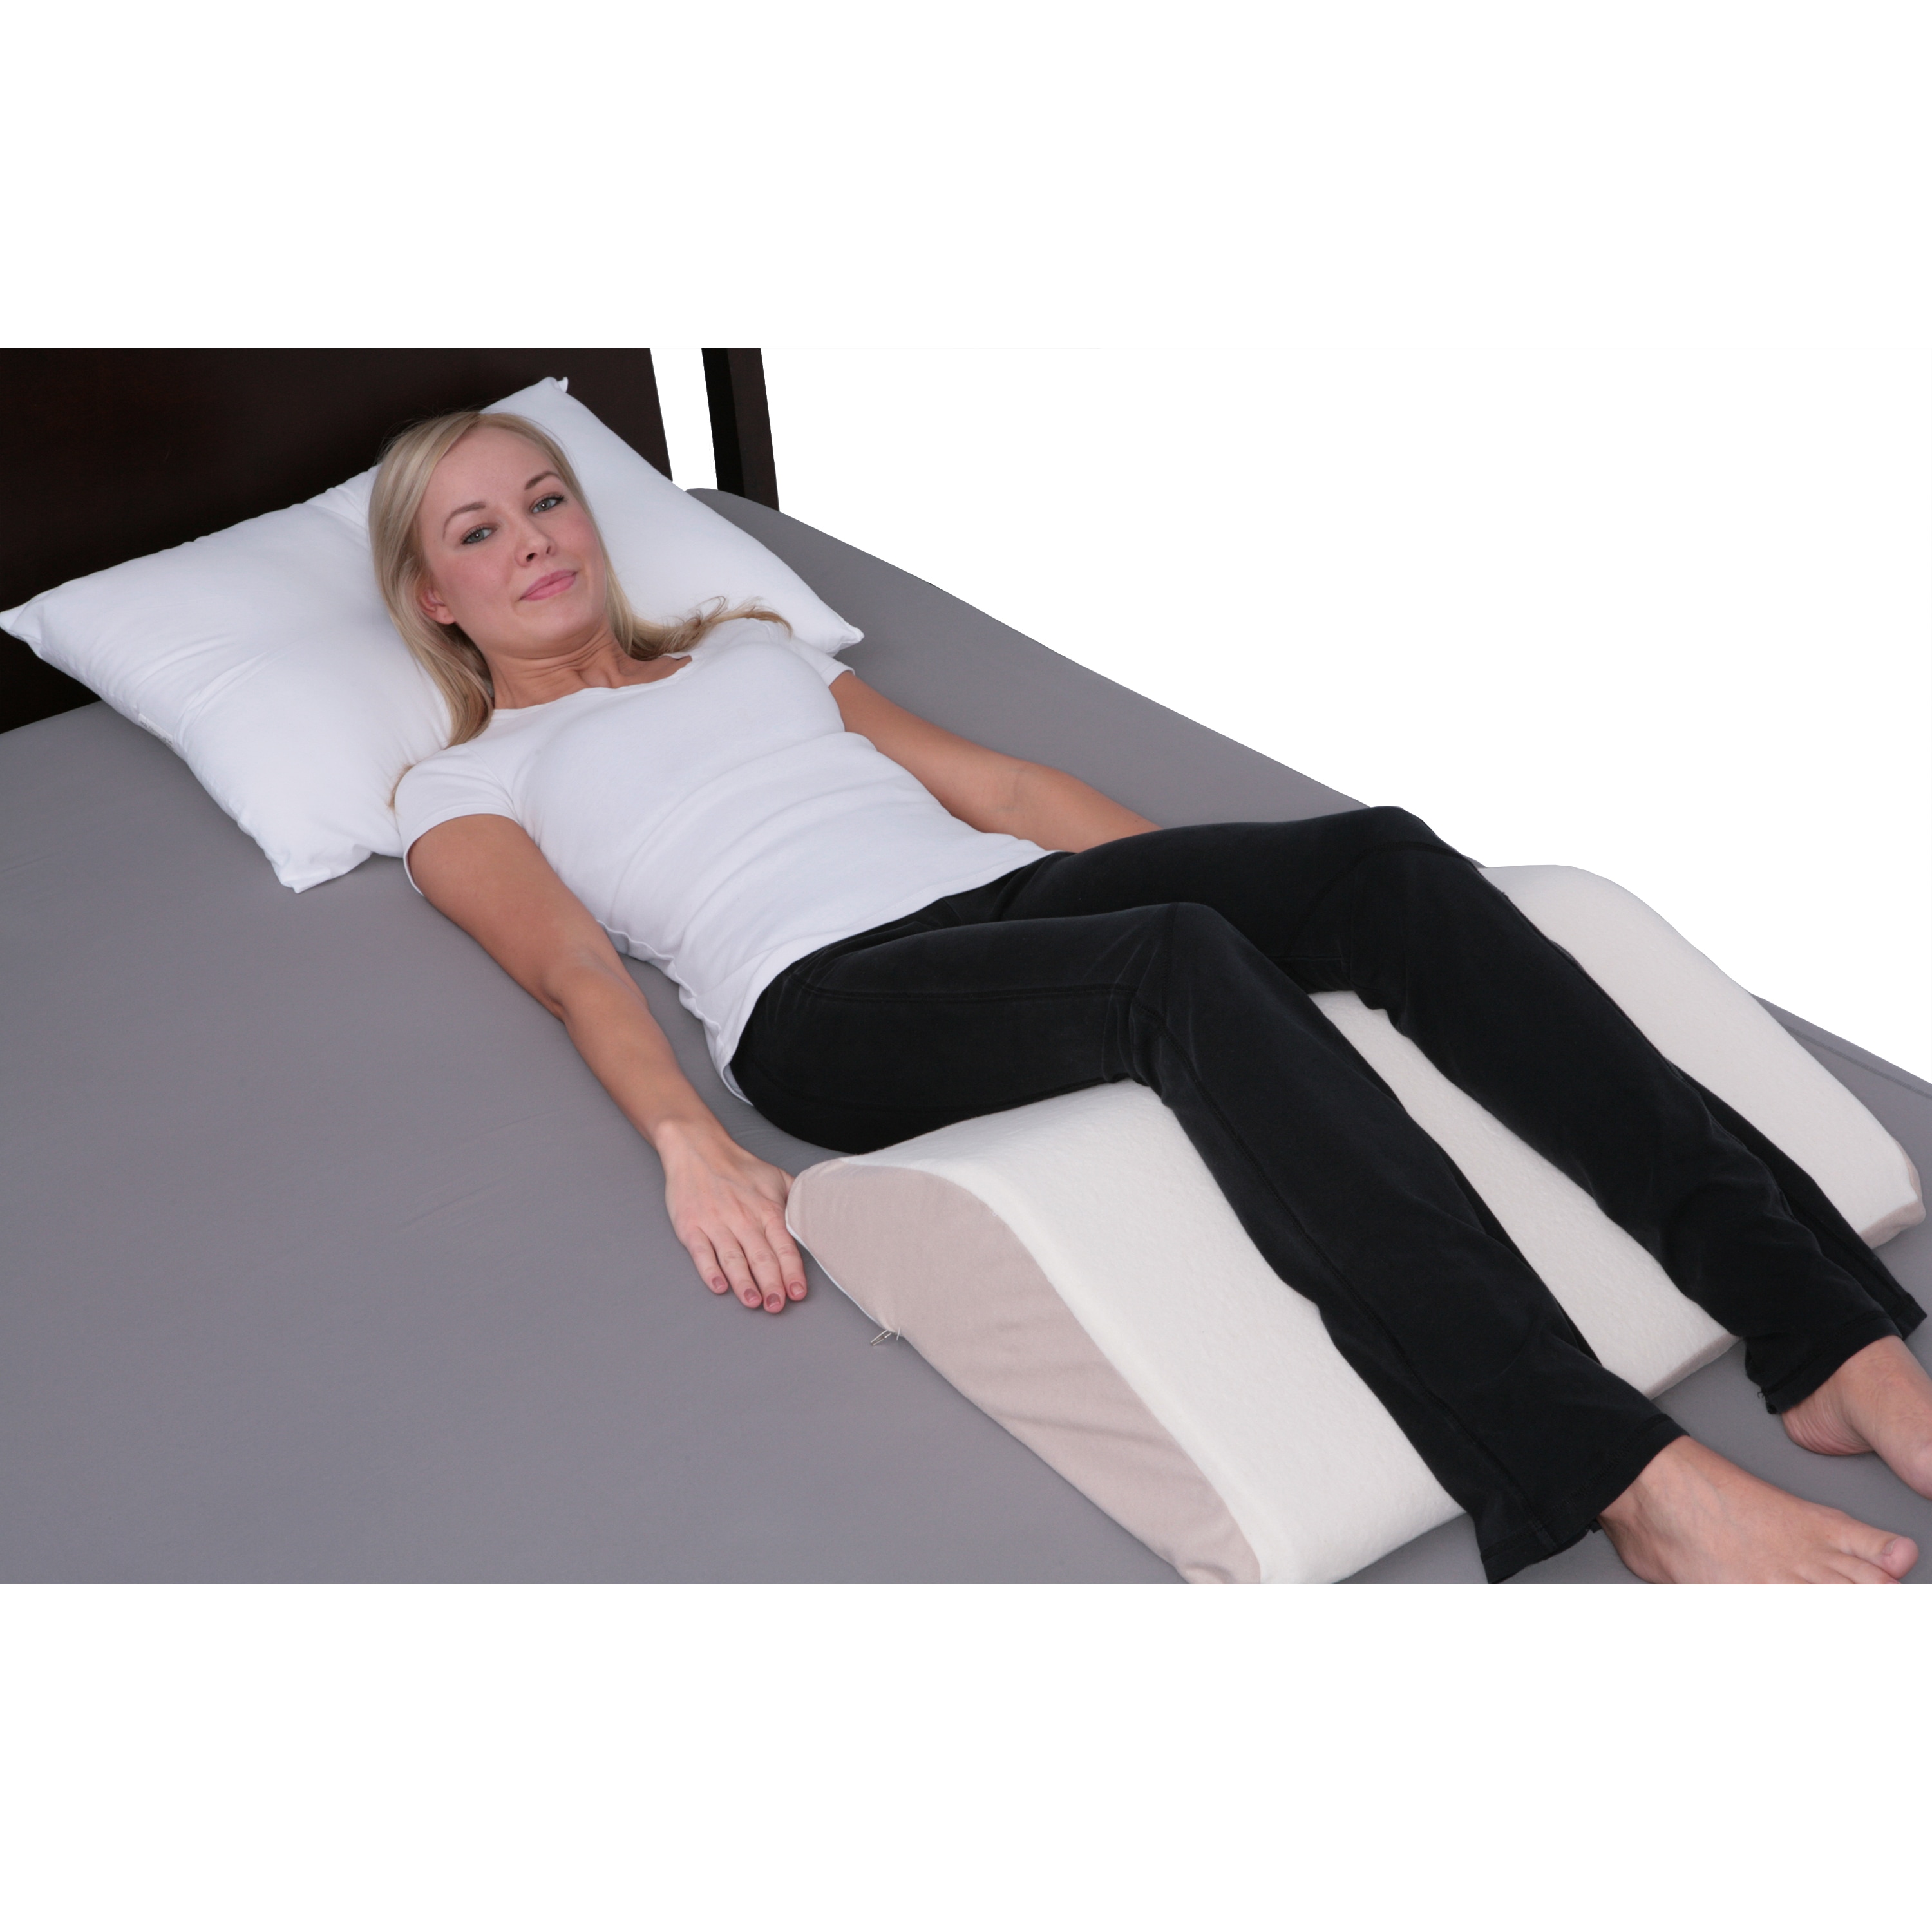 https://ak1.ostkcdn.com/images/products/12027424/Sloped-Knee-Lift-Foam-Pillow-with-Sherpa-Cover-b0e06941-d14b-4eda-8c41-fea4069aad22.jpg